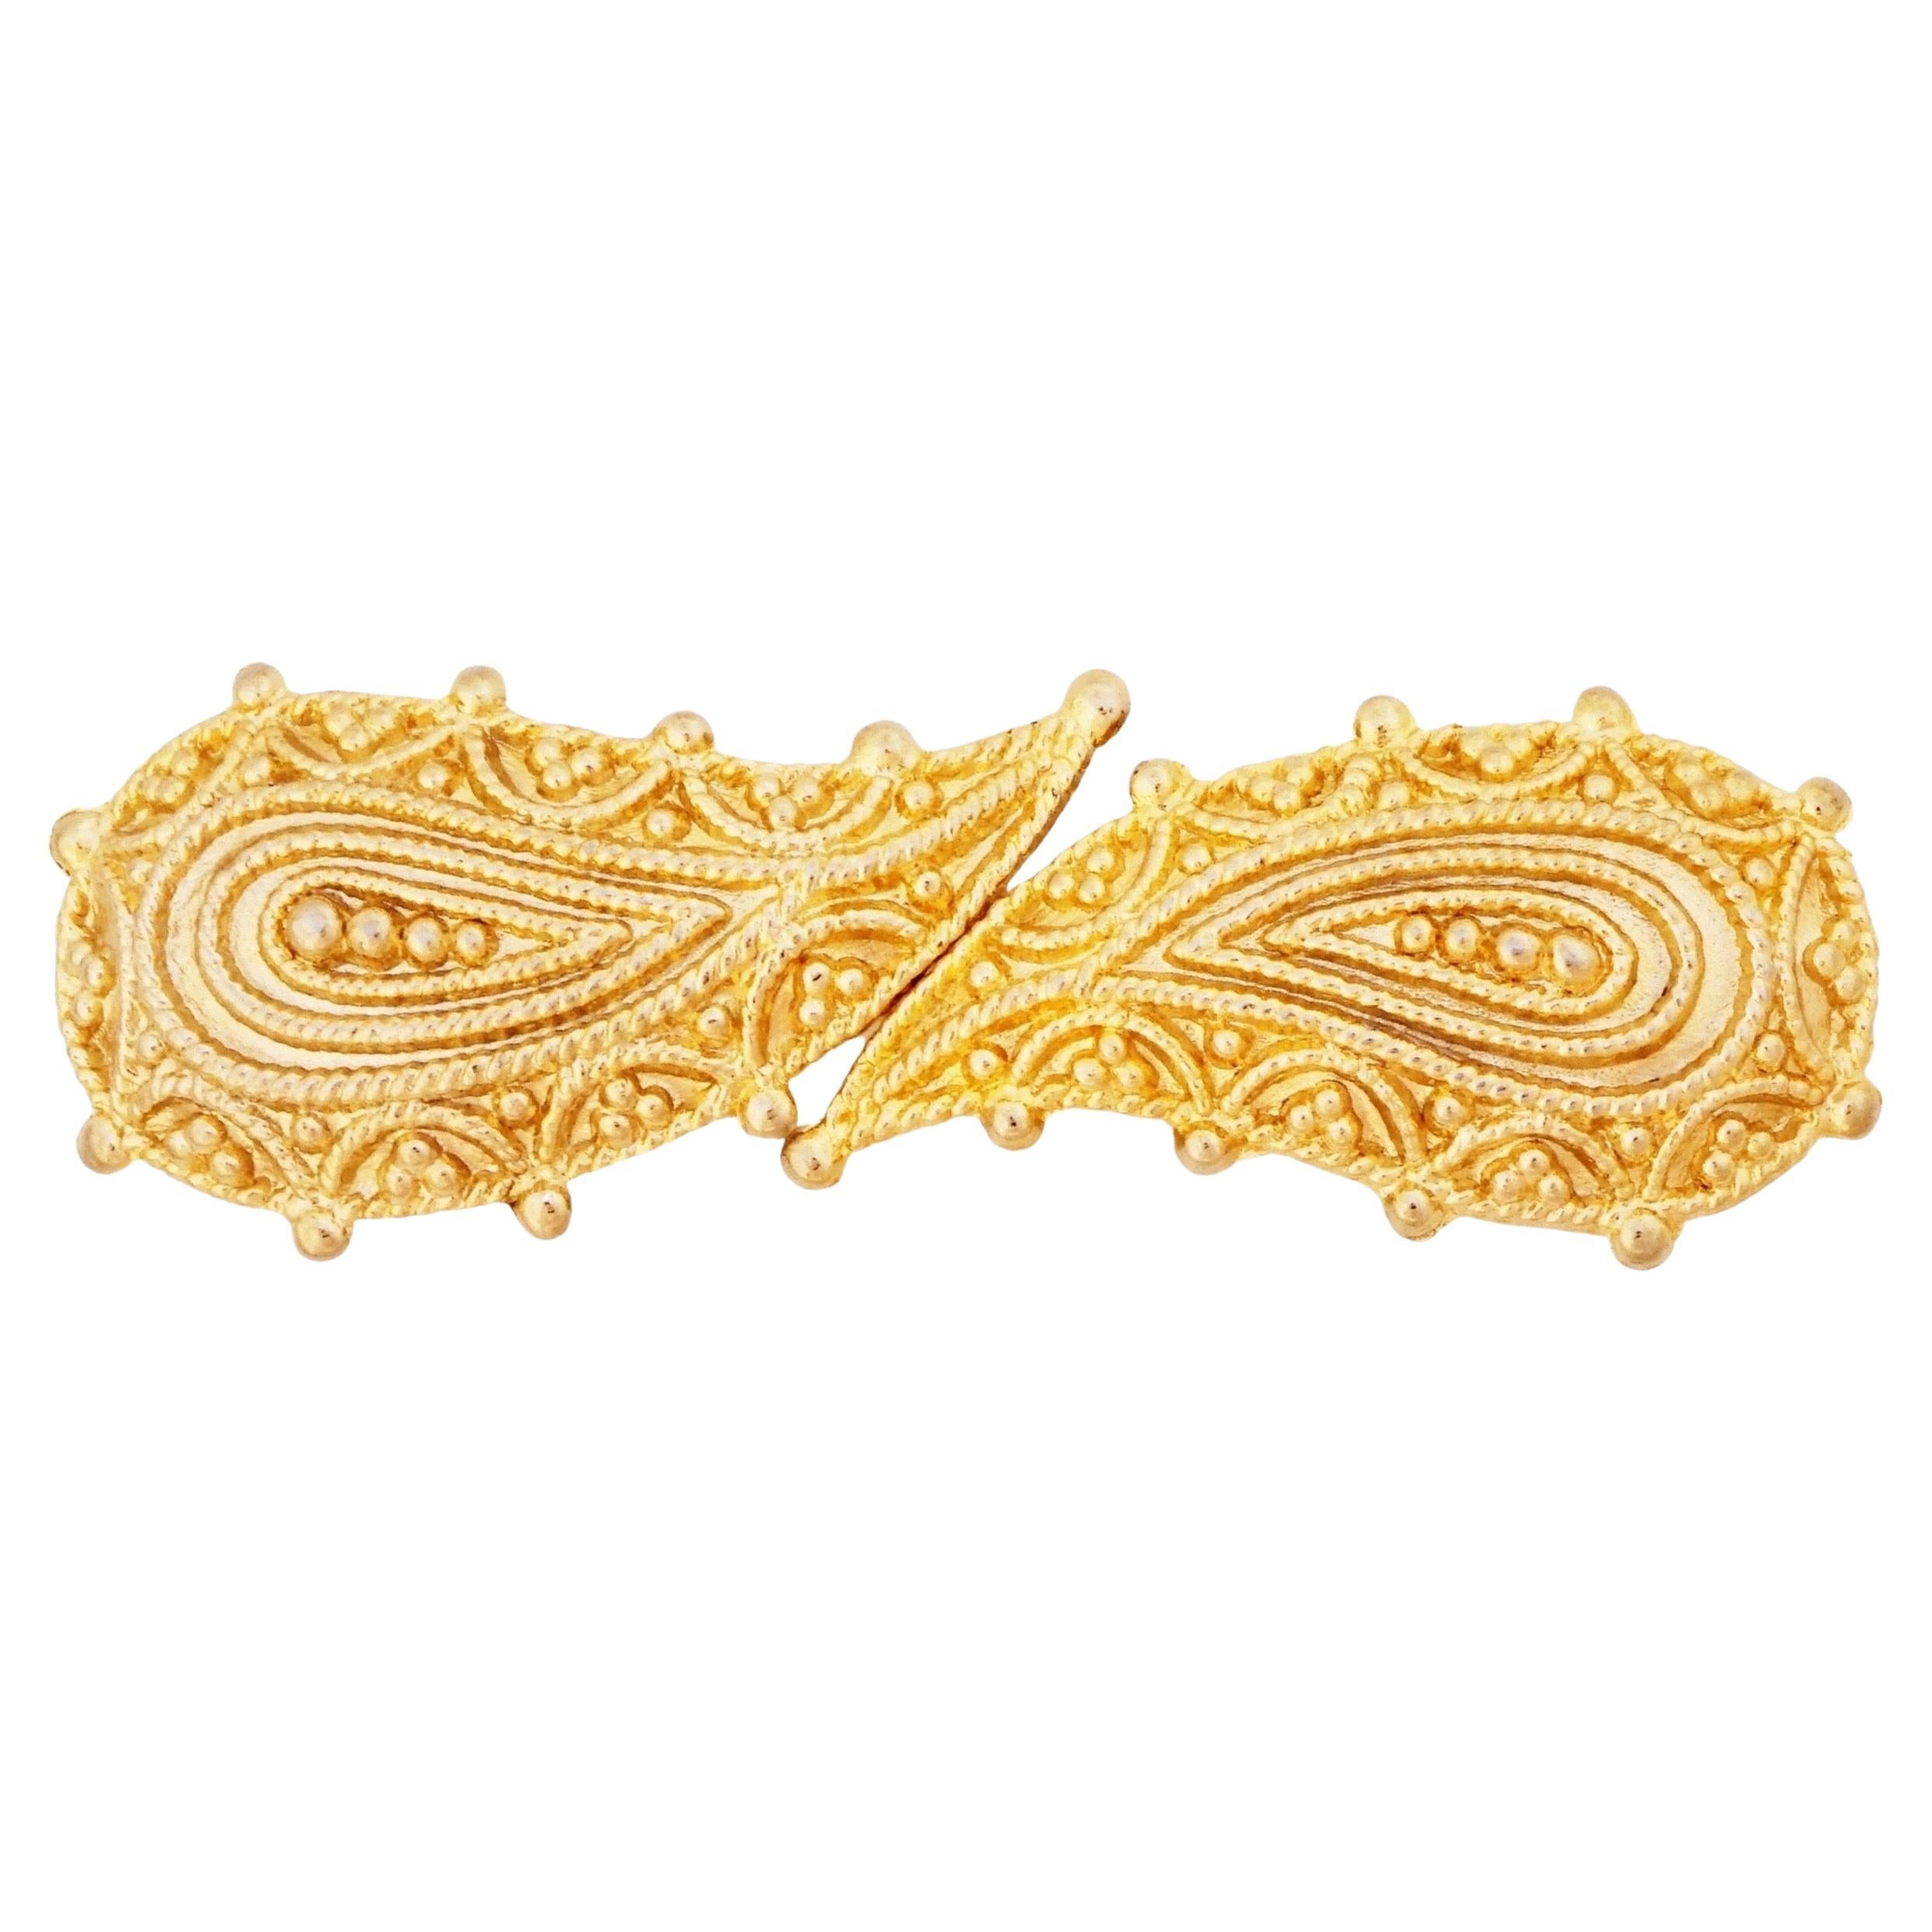 Gilded Paisley Belt Buckle By Mimi di Niscemi, 1980s For Sale at 1stDibs